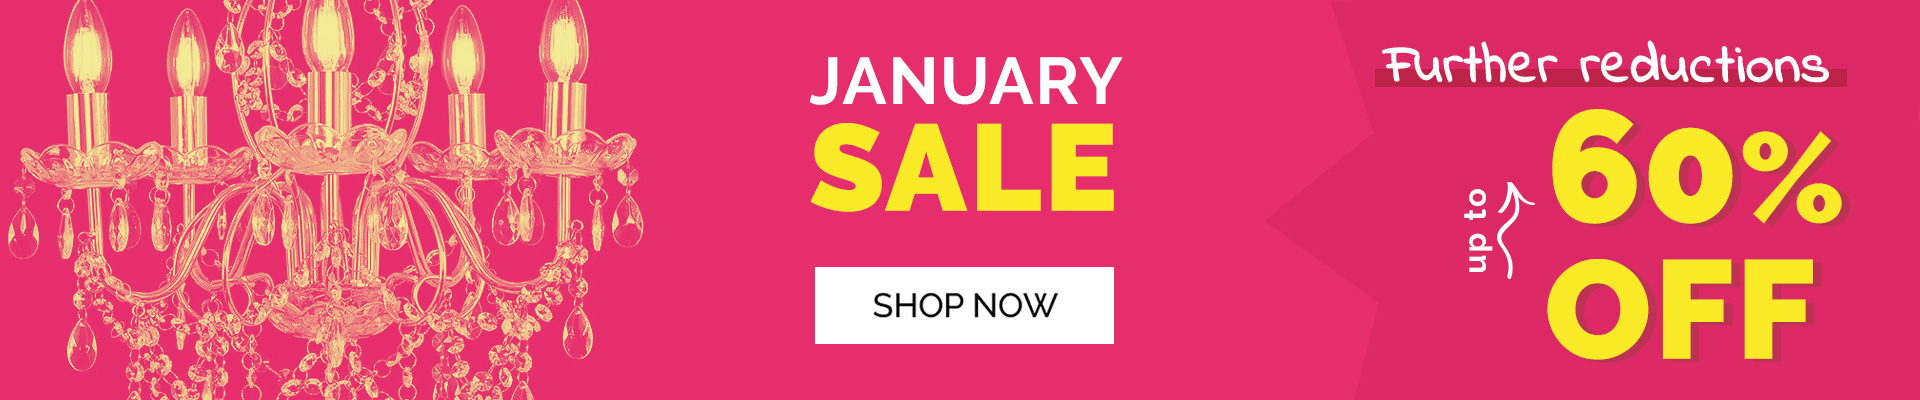 January Sale | further reductions | now up to 60% off | Shop All Sale